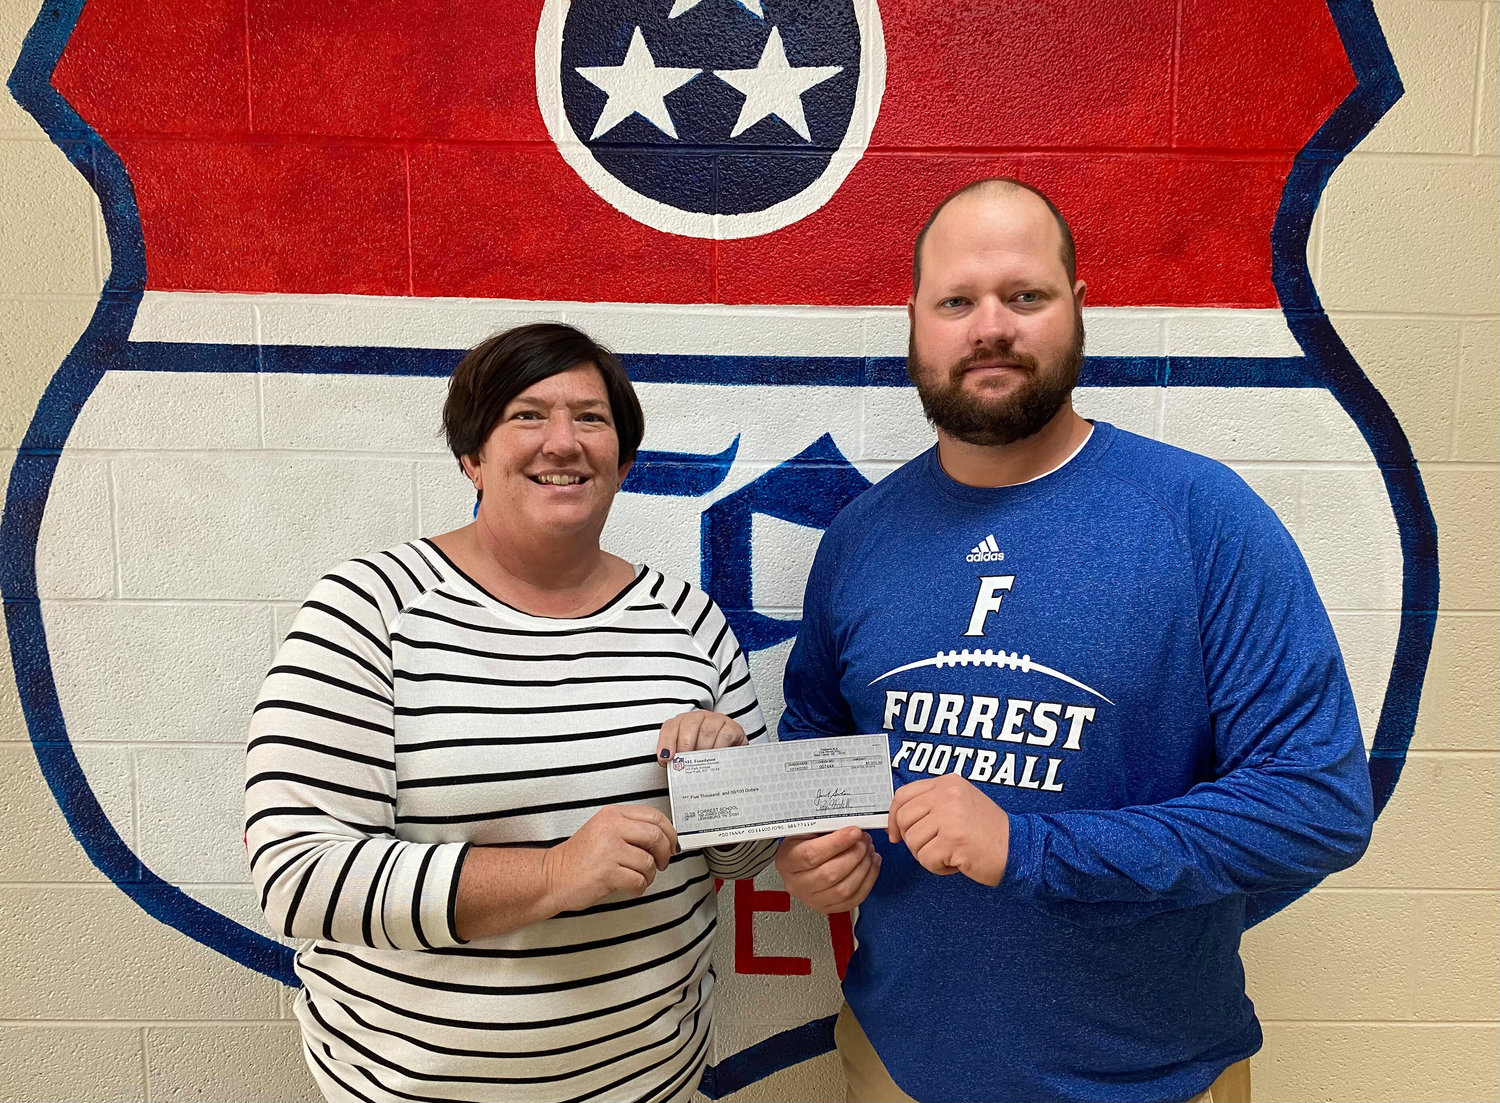 Forrest principal Angie Phifer and Rockets' football coach Eli Stephenson accept the check from the NFL Foundation.
"Forrest School and Forrest Football recently received a huge honor," Phifer said. "We were selected to receive one of the 2019 NFL Foundation Super Bowl High School Honor Roll Grants!!"
"HUGE shout out to Mr. Dont’a Hightower, linebacker for the New England Patriots, for nominating us!! We are very honored to be nominated and so appreciative of his support!! We would like to say a big THANK YOU to Dont’a and the NFL Foundation from Forrest School and Forrest Football!!"